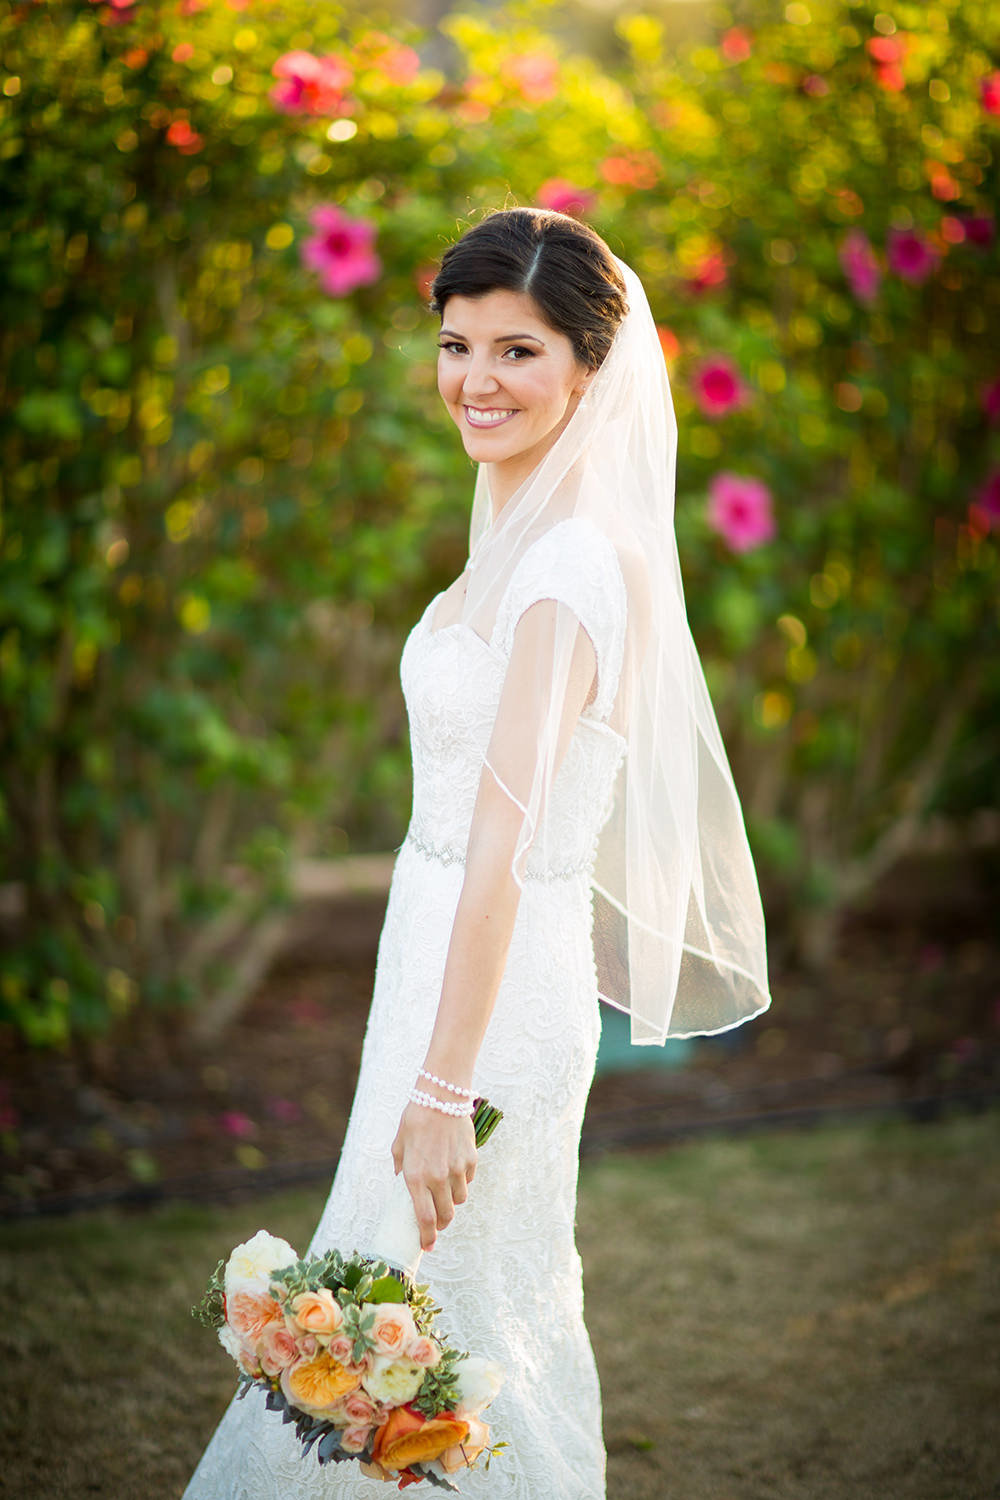 Colorful background and creamy bokeh for this bridal portrait